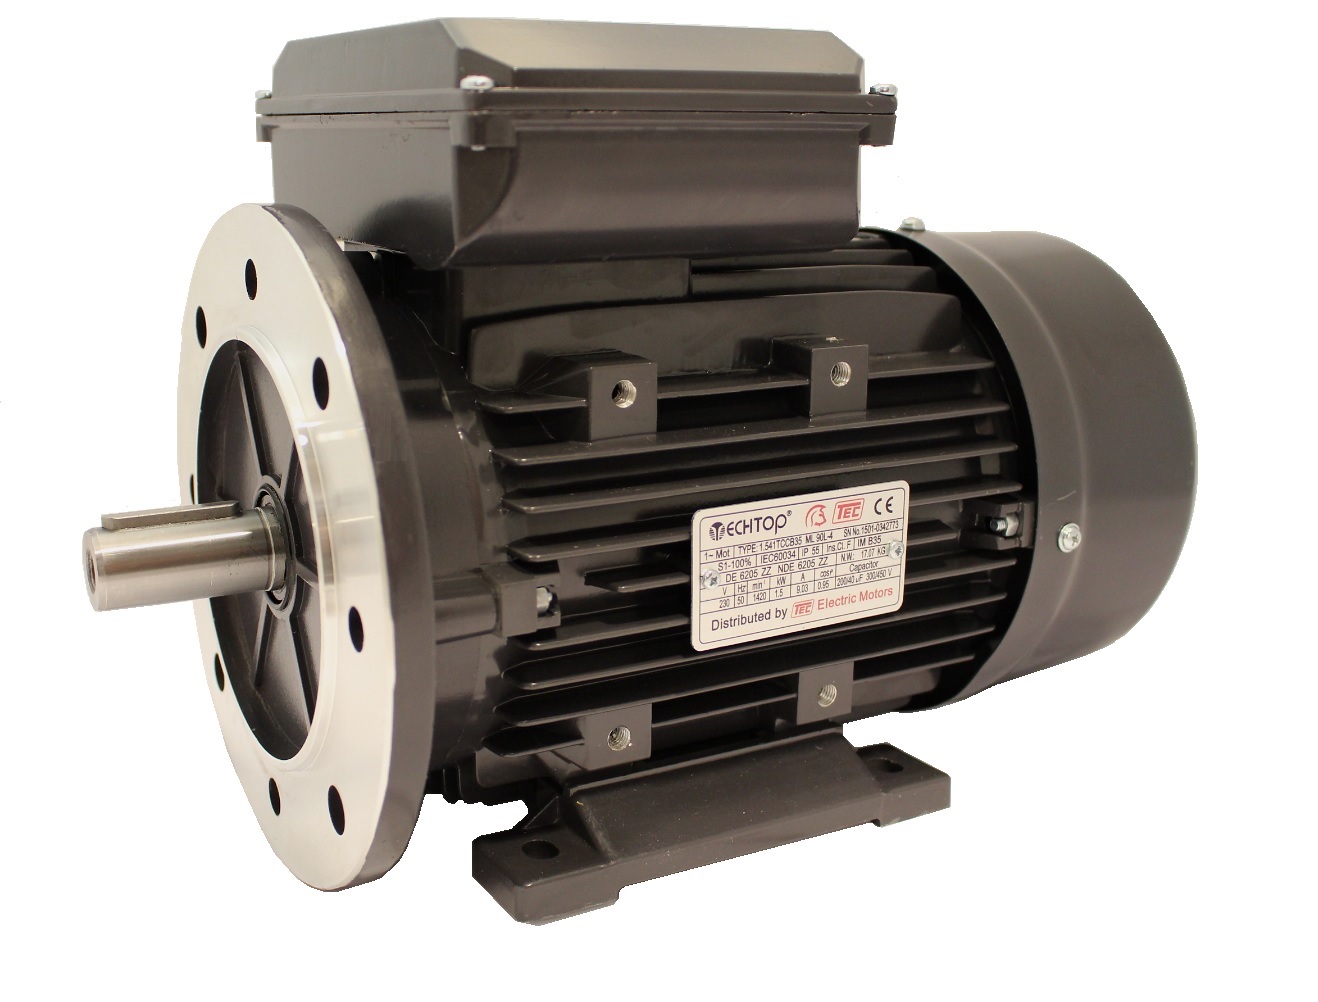 Single Phase 110V Elec Motor, 2.2Kw 4 pole, 1500rpm with flange and foot mount 2.241TCCB35-110